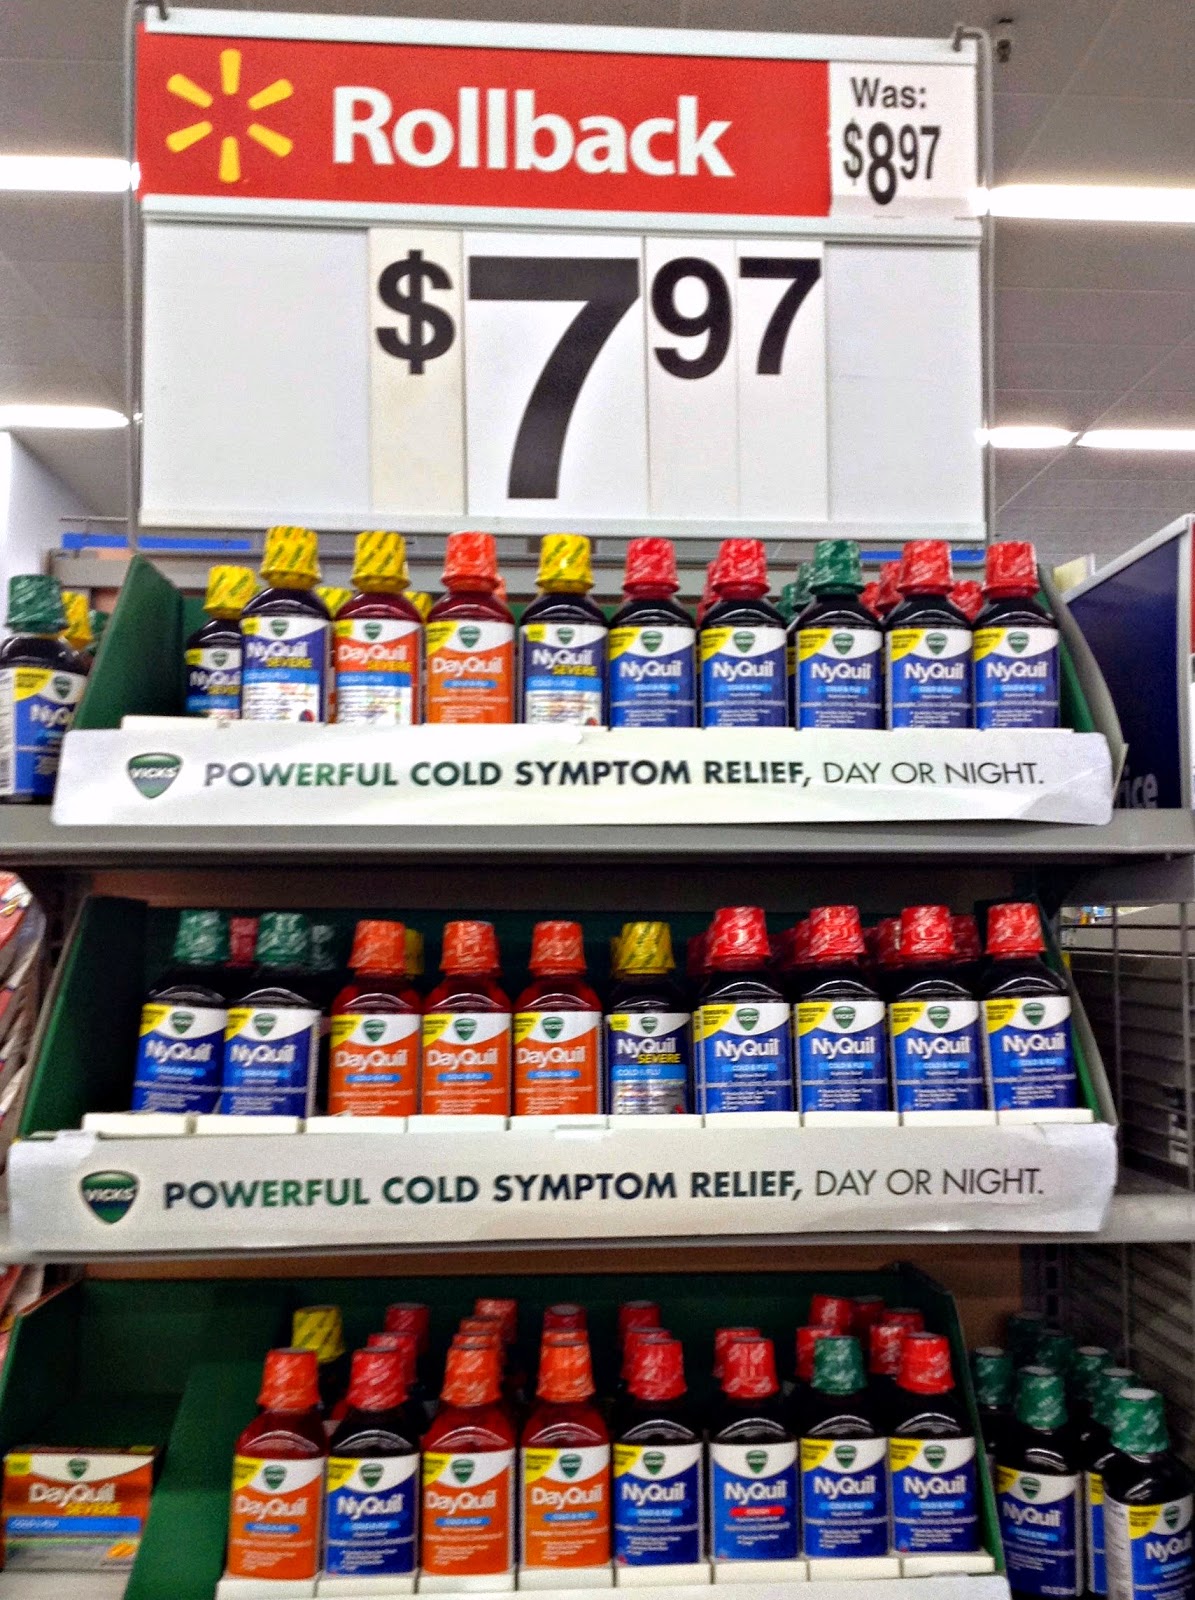 Flu Season is Upon Us and #ReliefIsHere from @Walmart and on sale